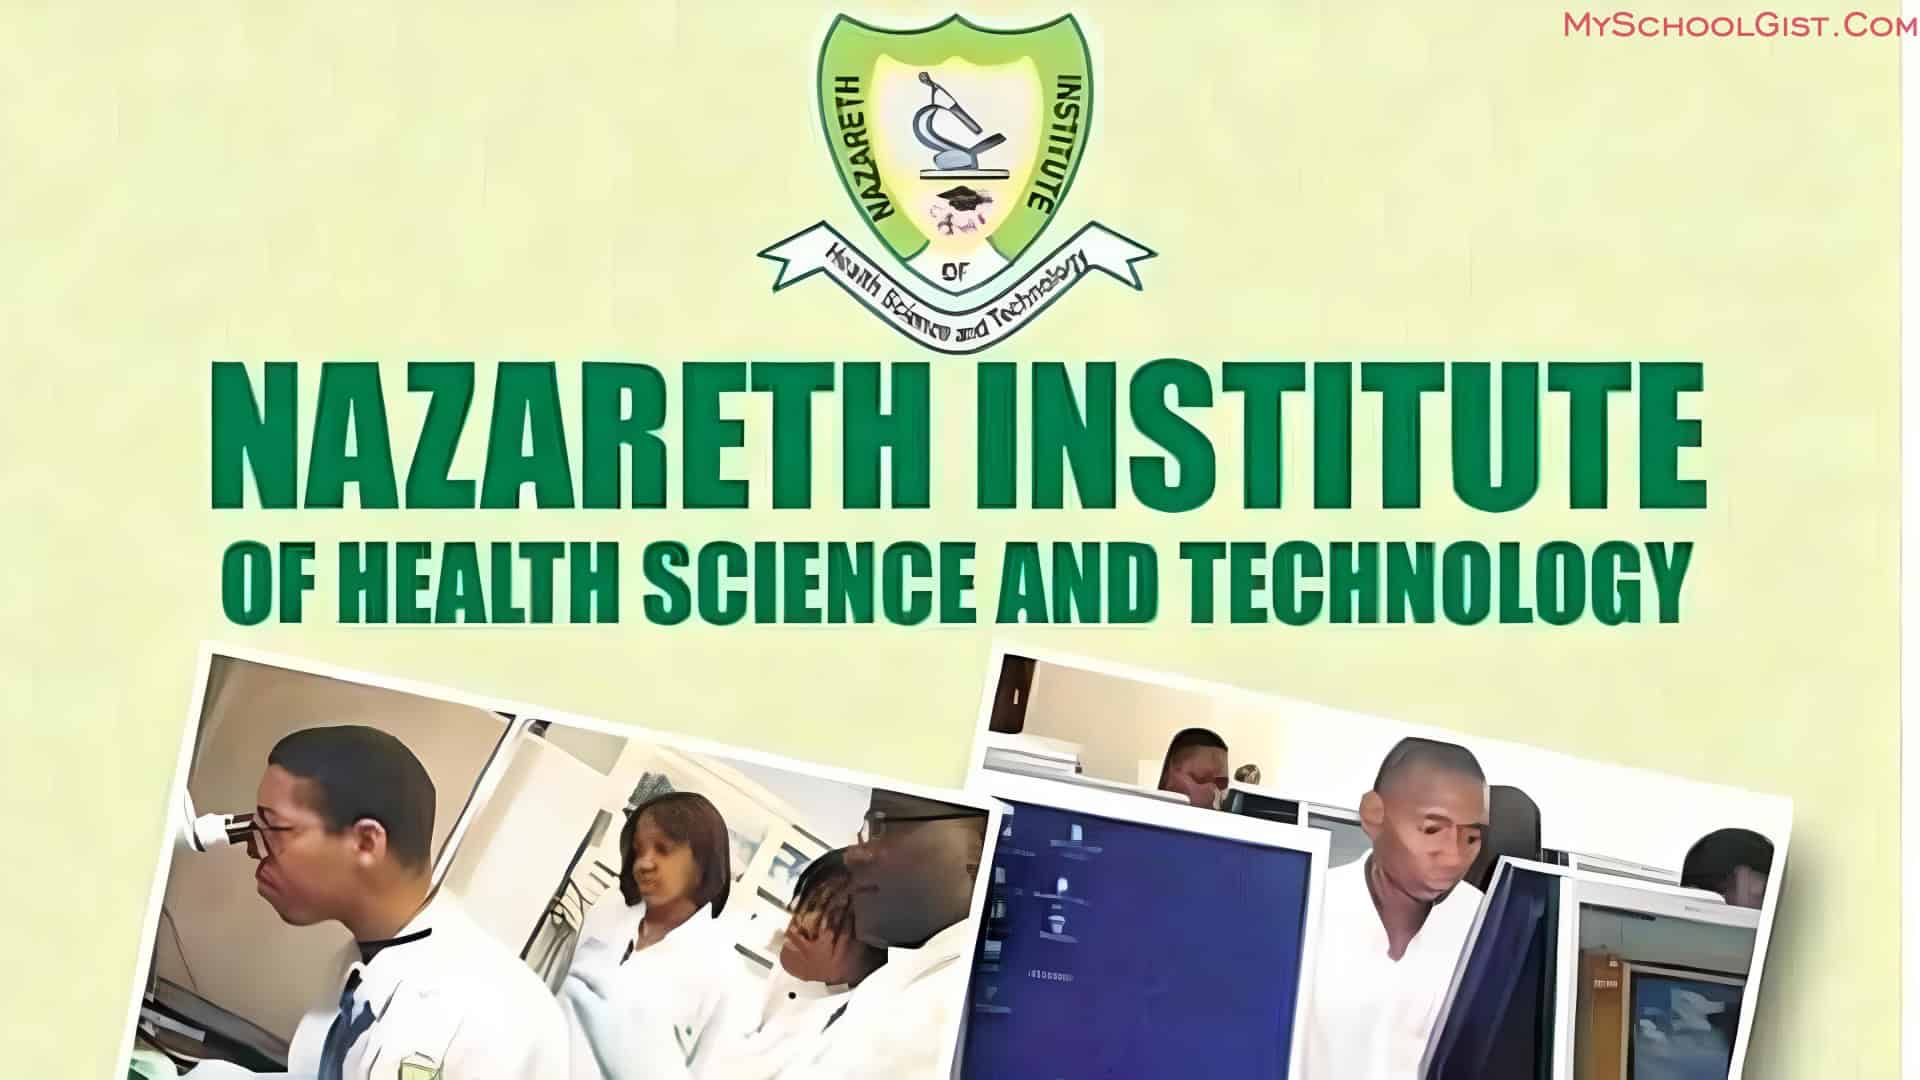 Nazareth Institute of Health Science and Technology (NIHST) Admission Form